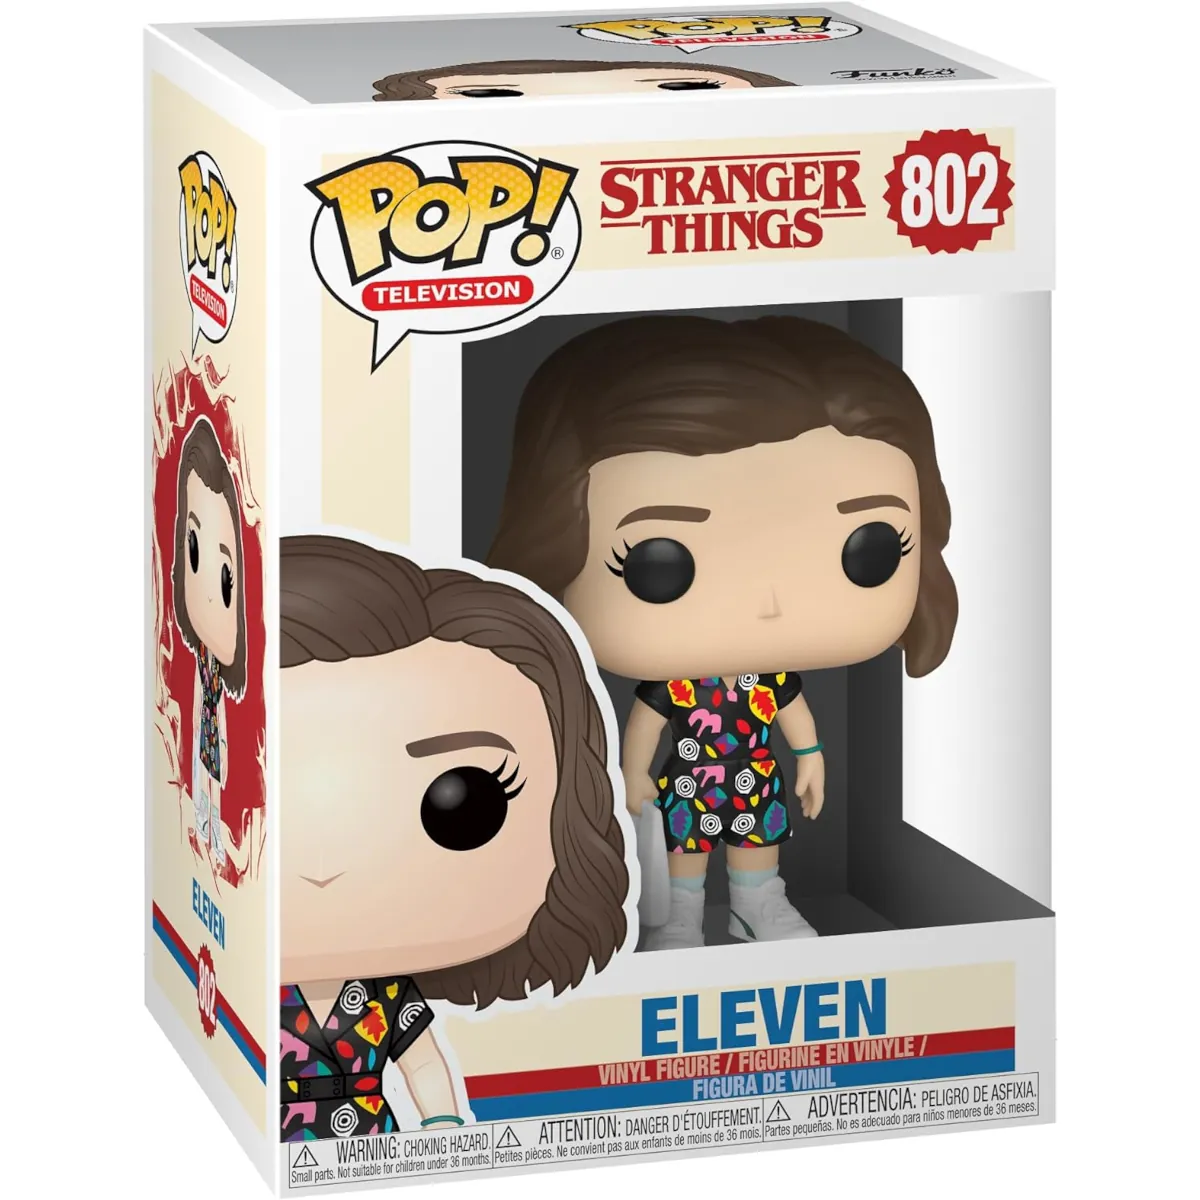 Funko Pop Television Stranger Things Eleven (Mall Outfit) Collectable Vinyl Figure Box